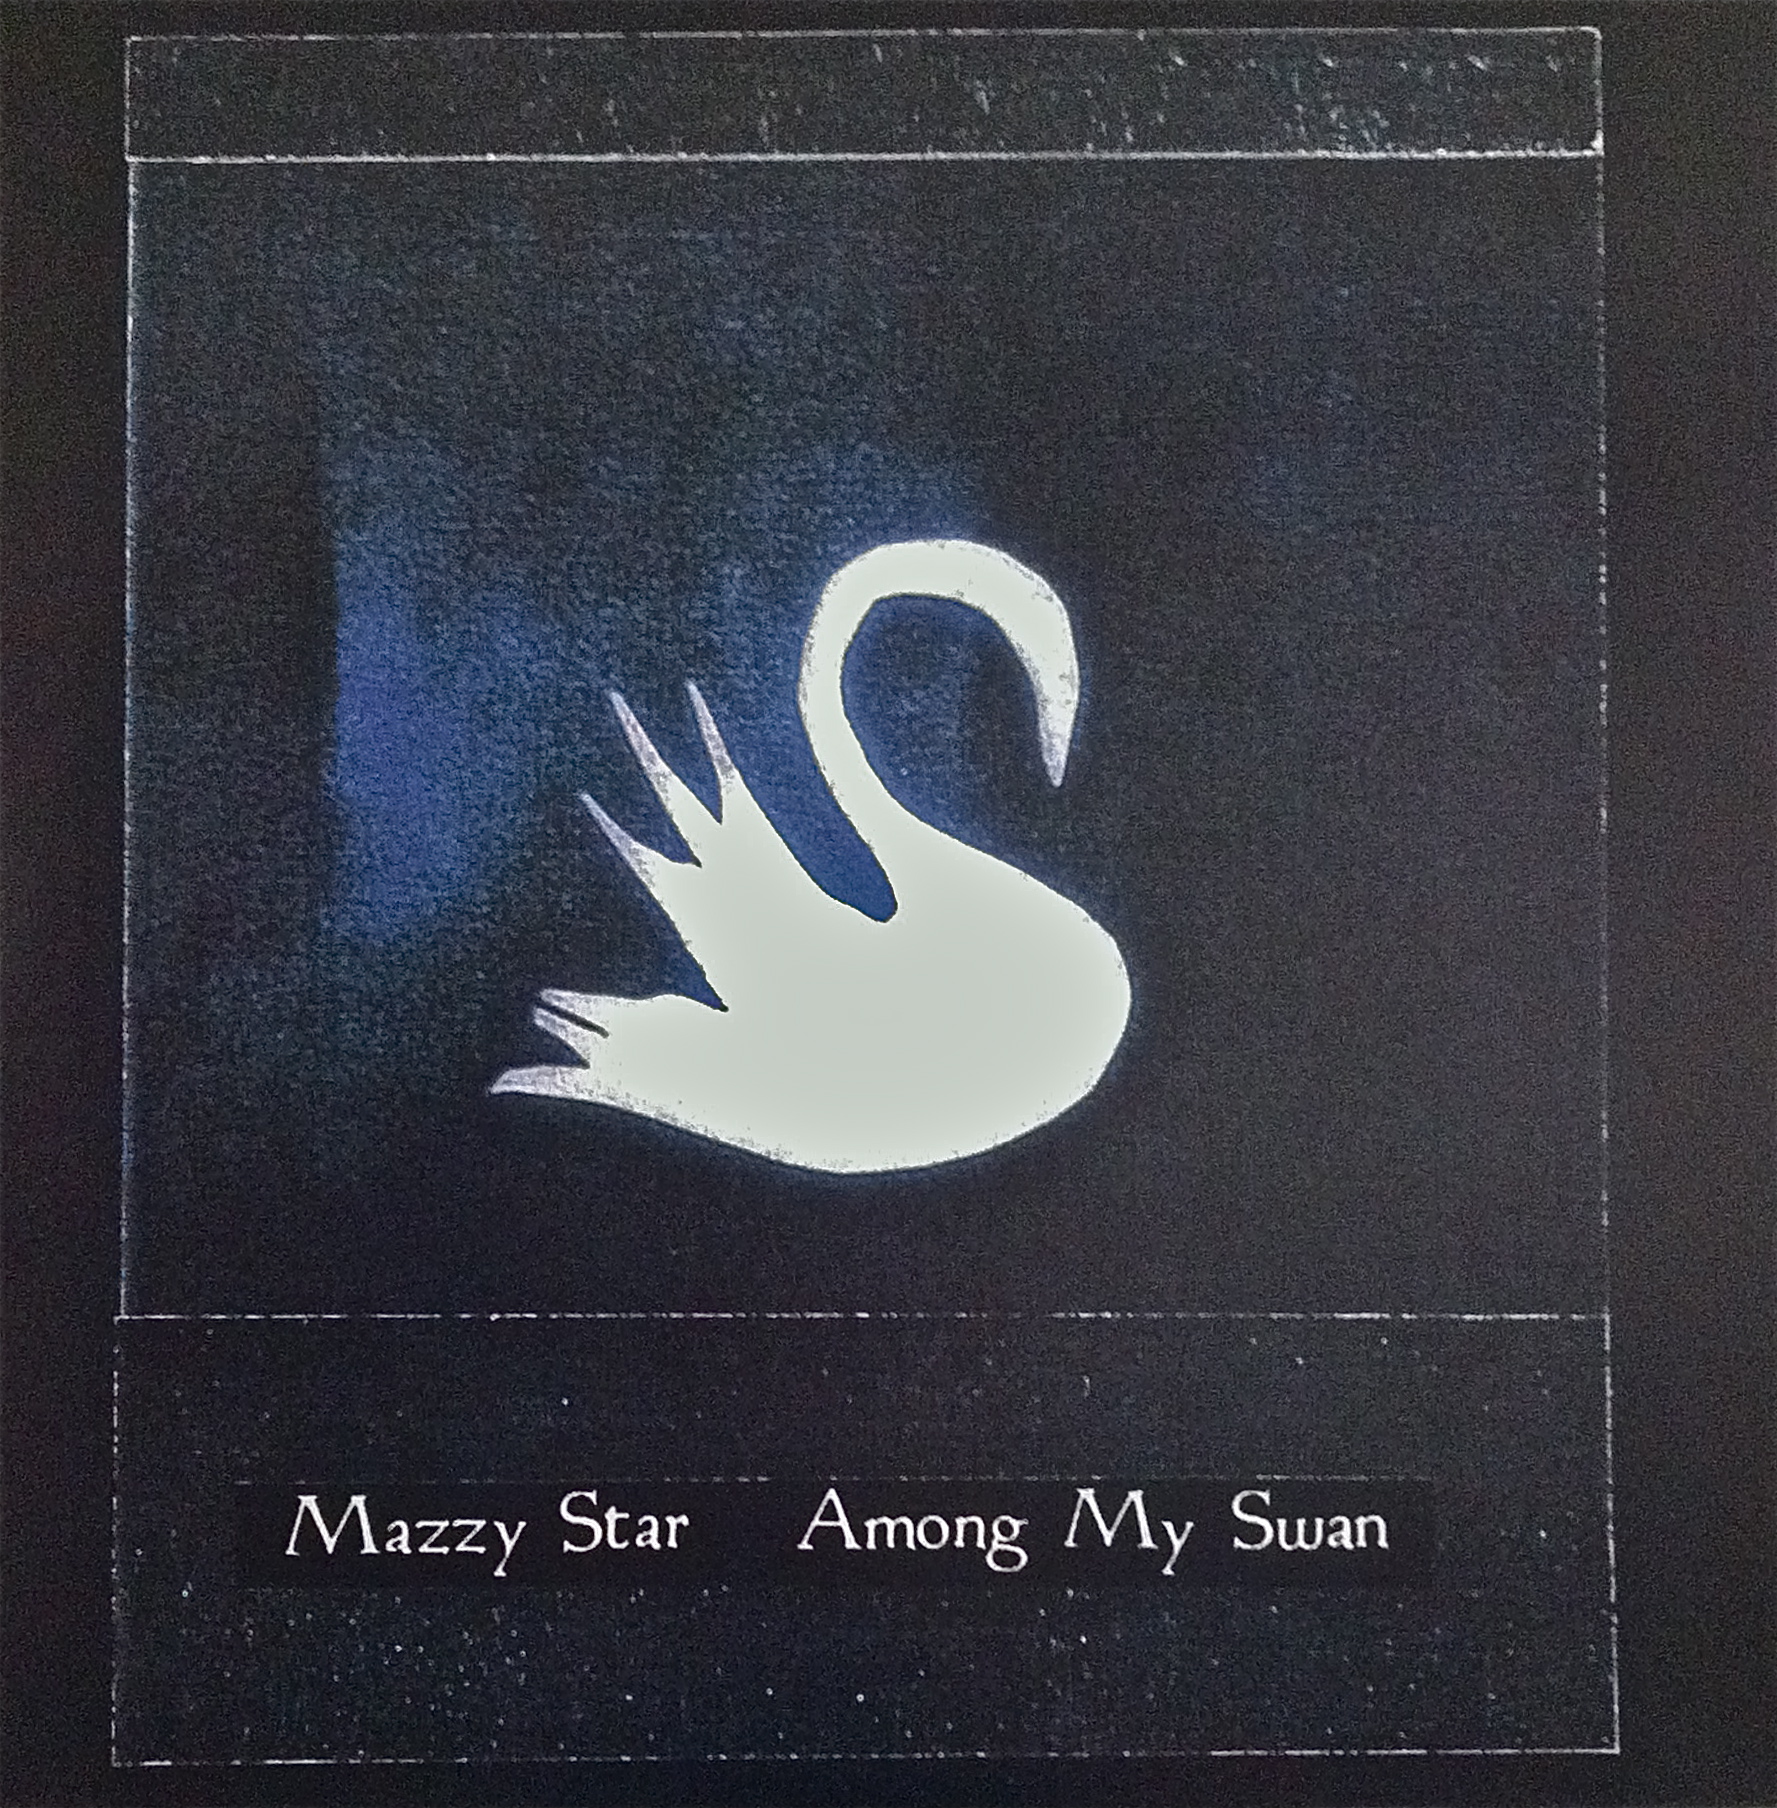 Mazzy Star To Play First Live Show In Over Five Years